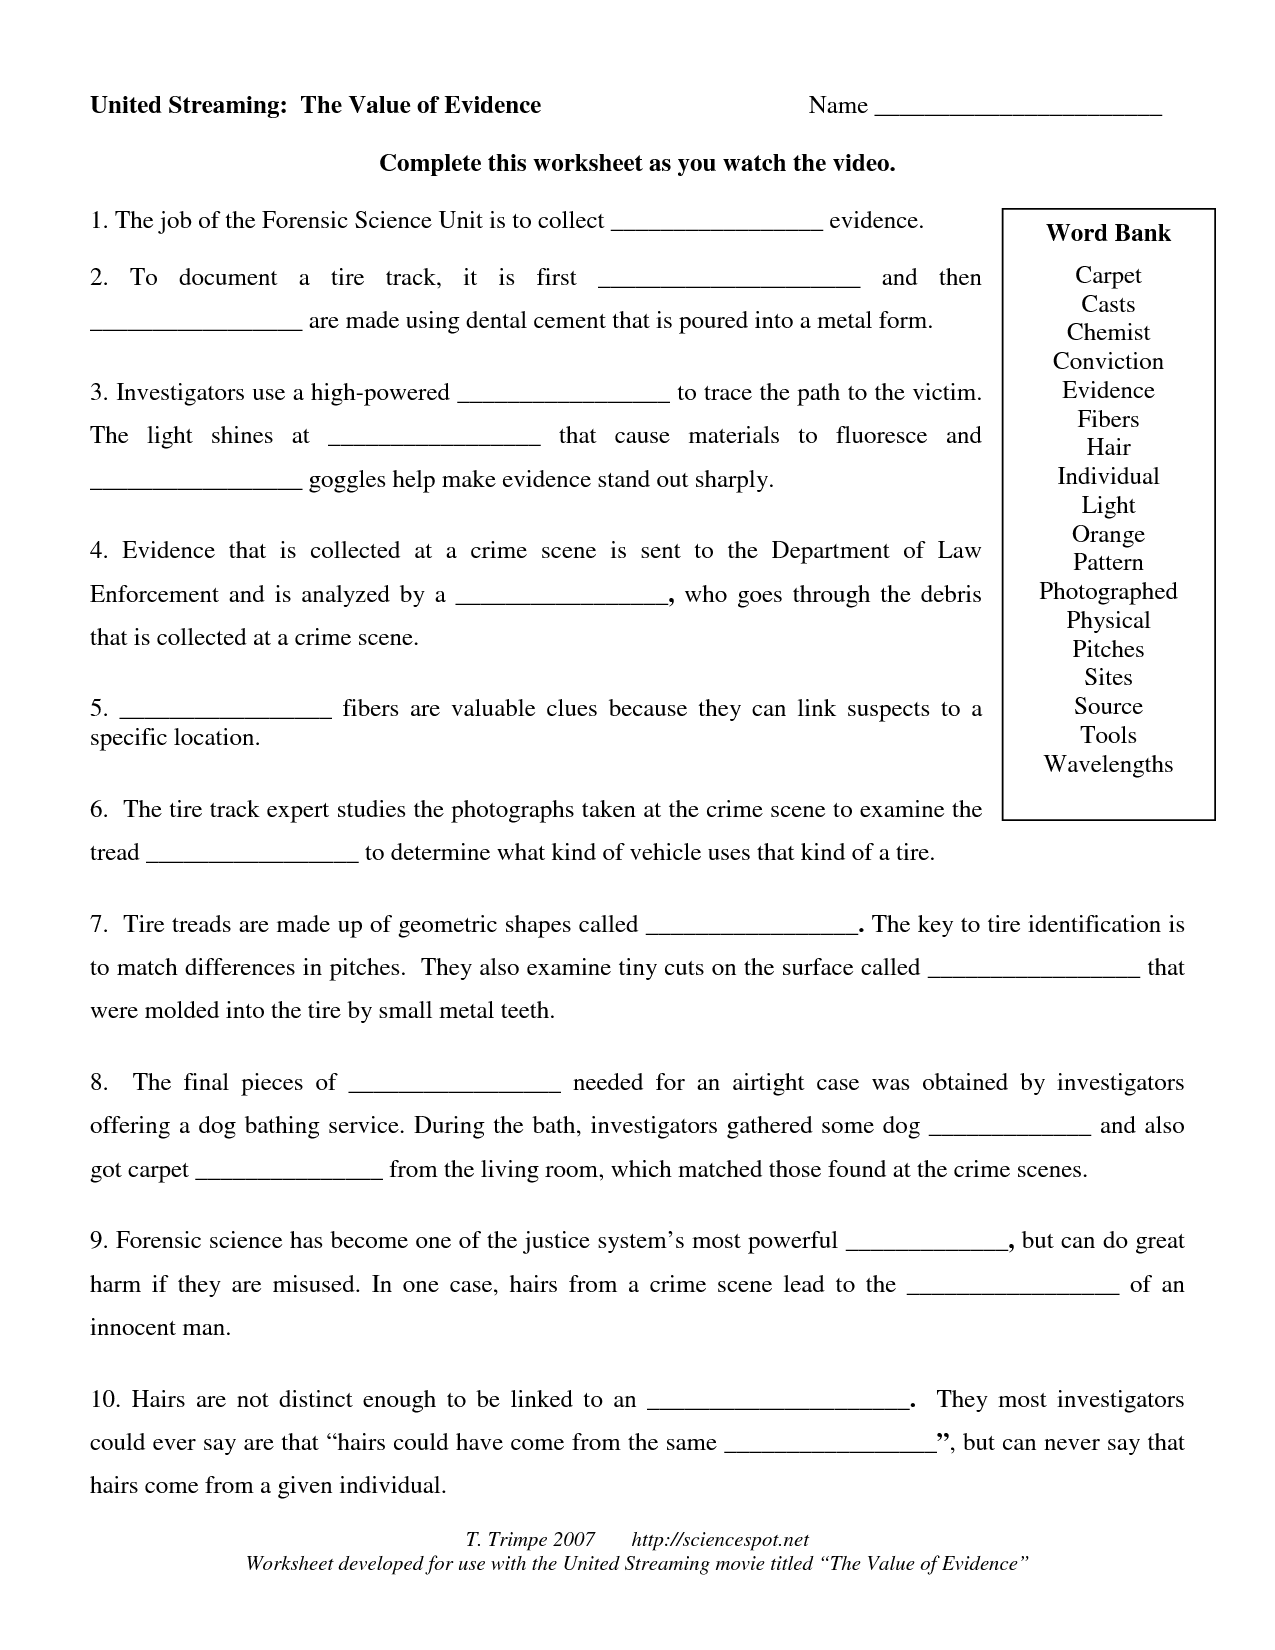 Forensic Science Worksheet Answers Image